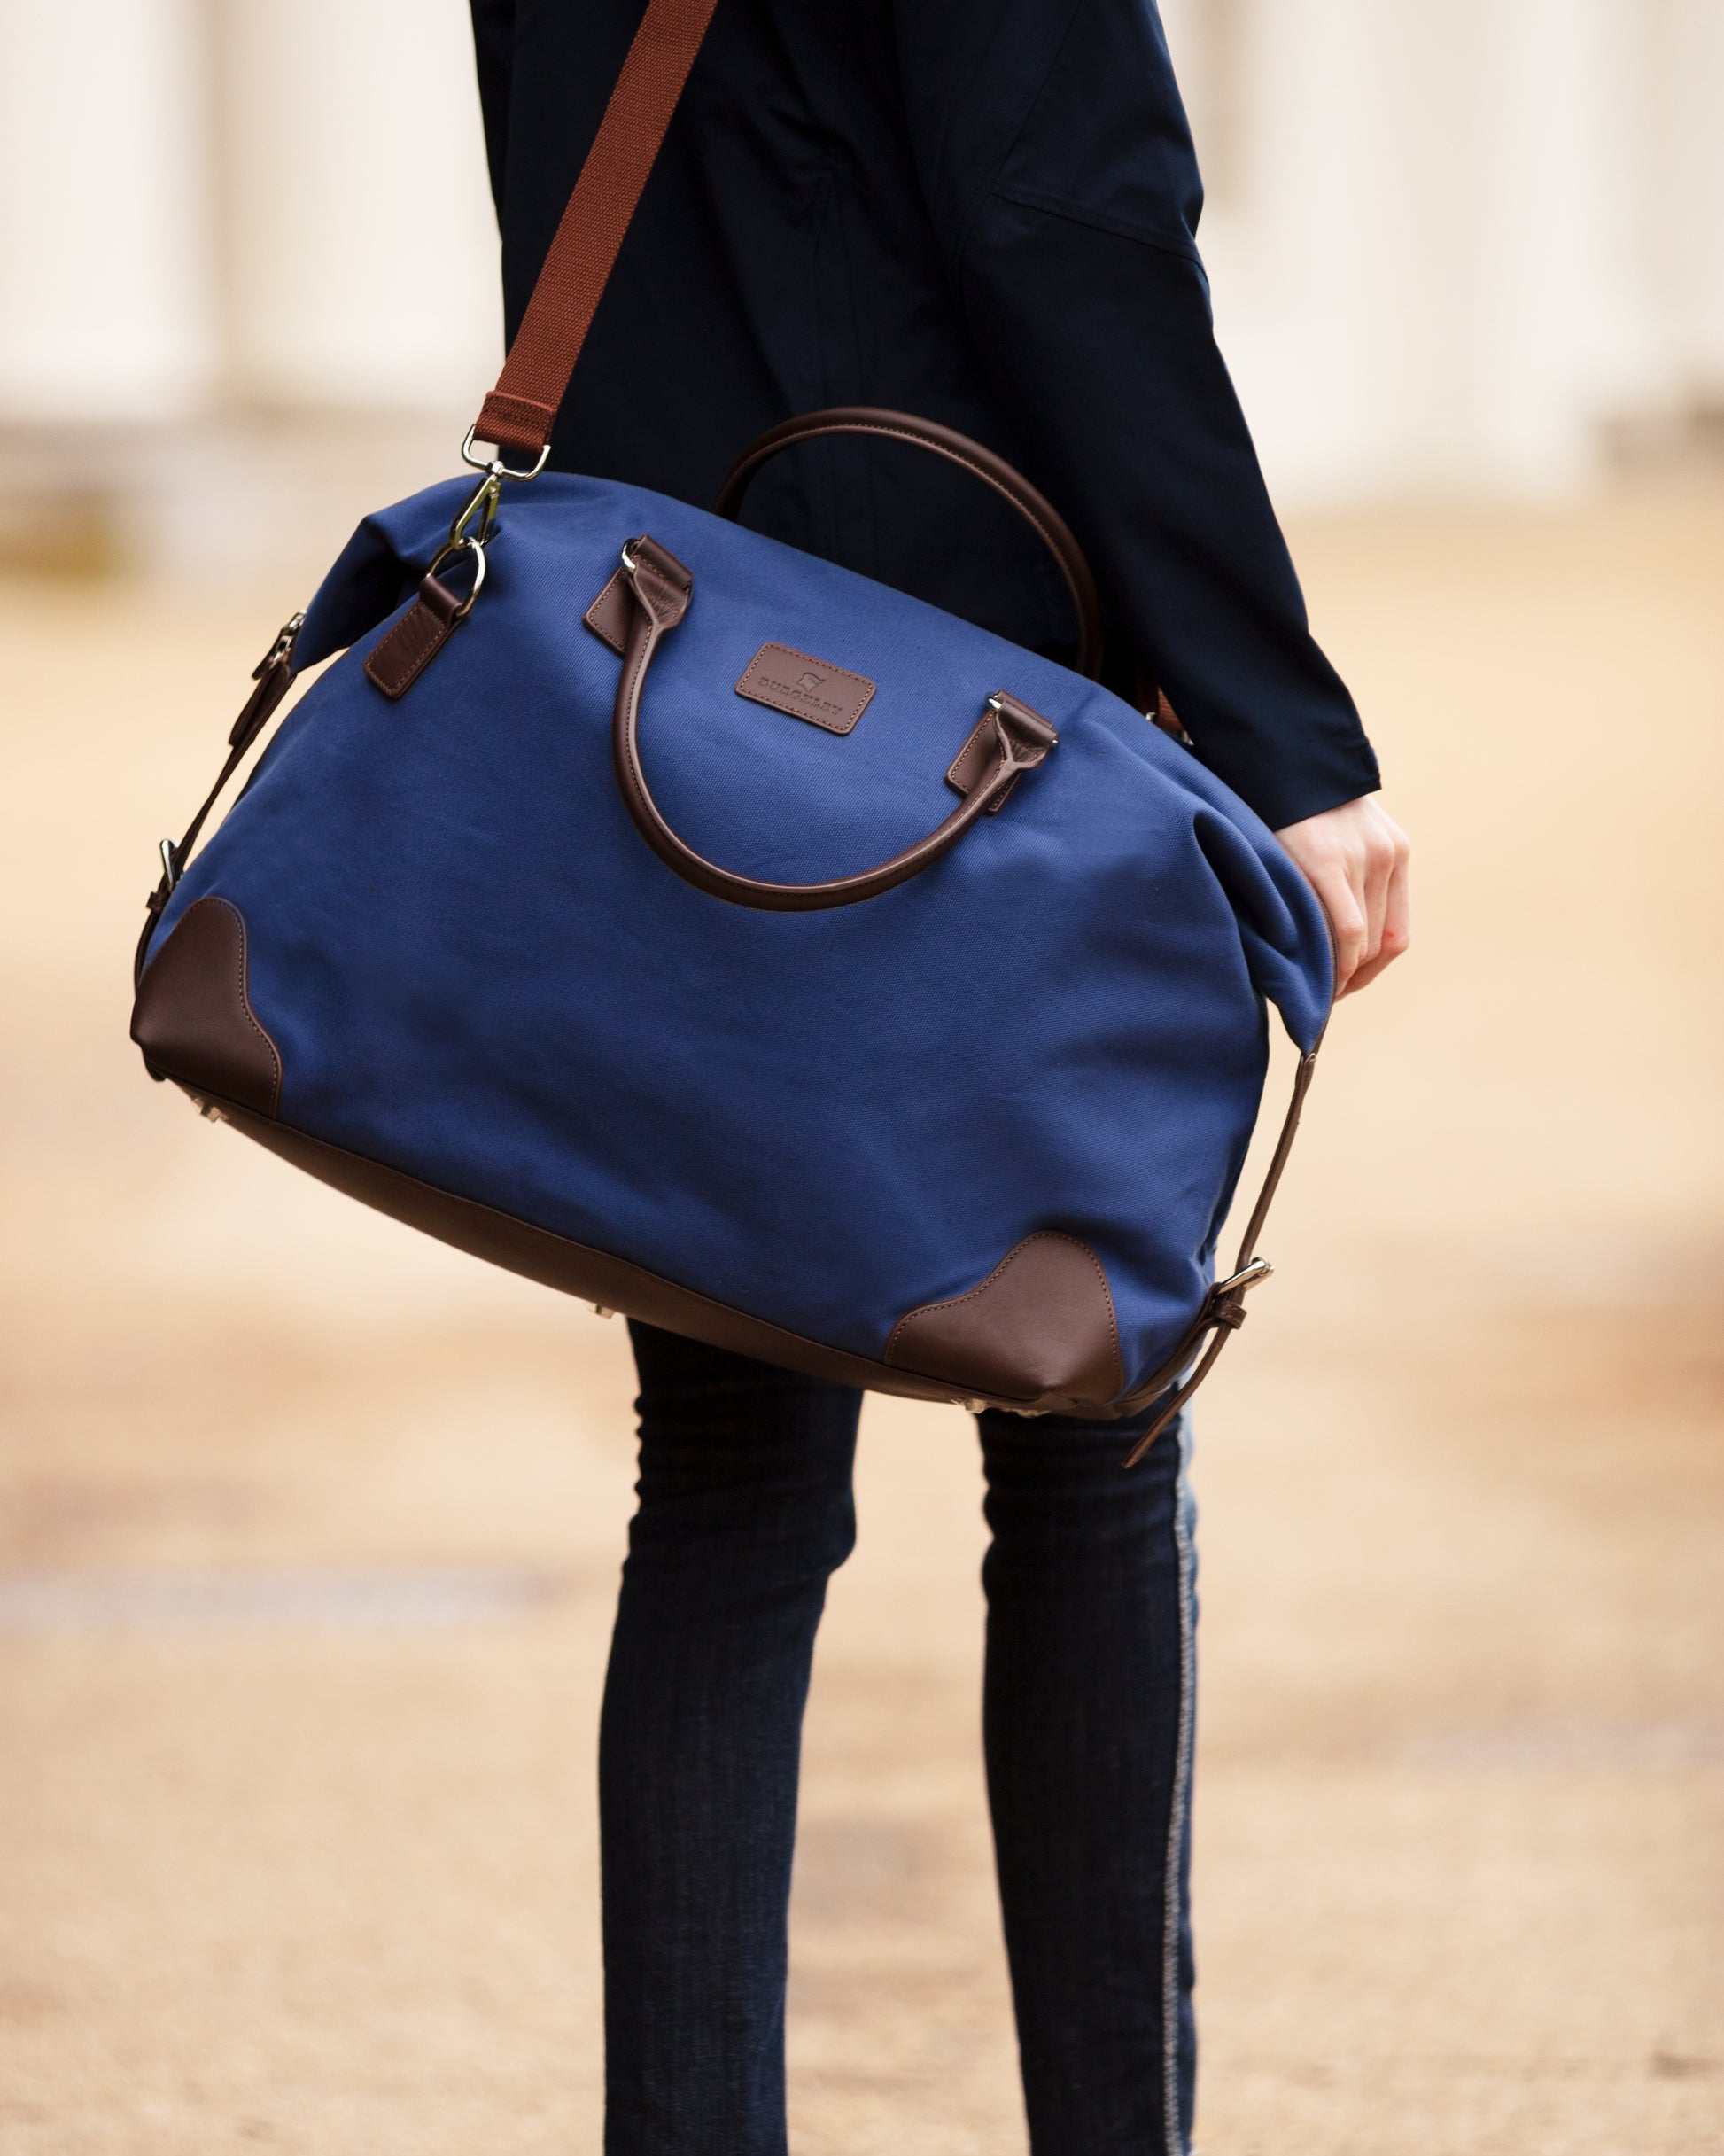 Handmade blue cotton canvas and vegetable tanned leather holdall by Burghley Bags.